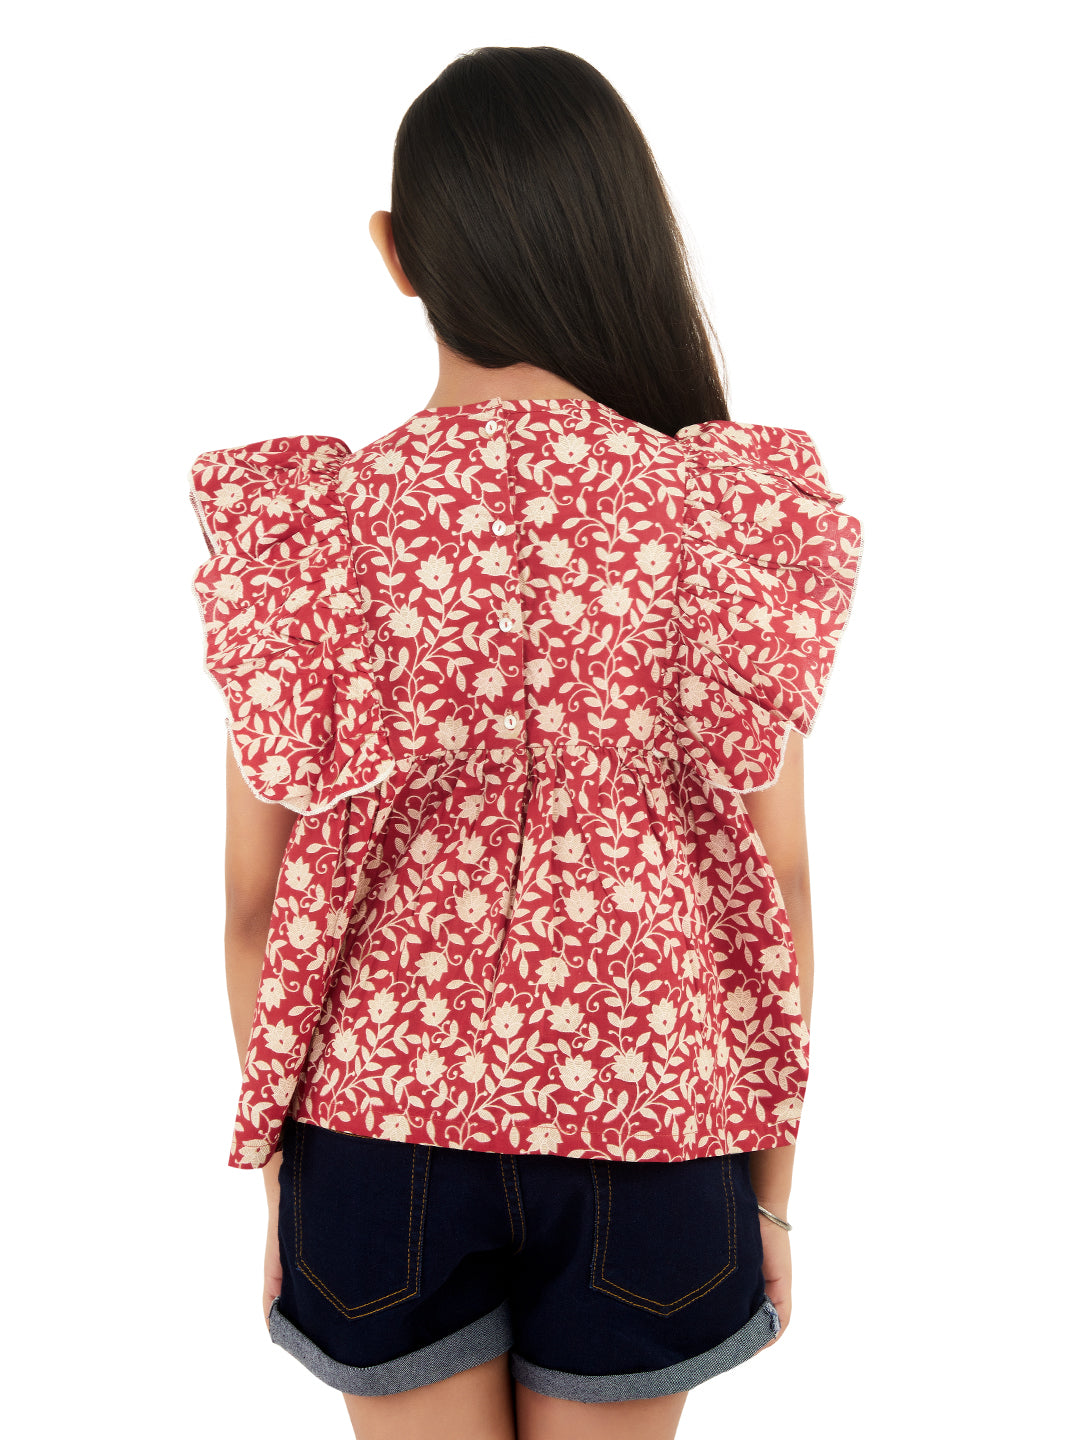 Olele® Lace Top in Printed Cotton